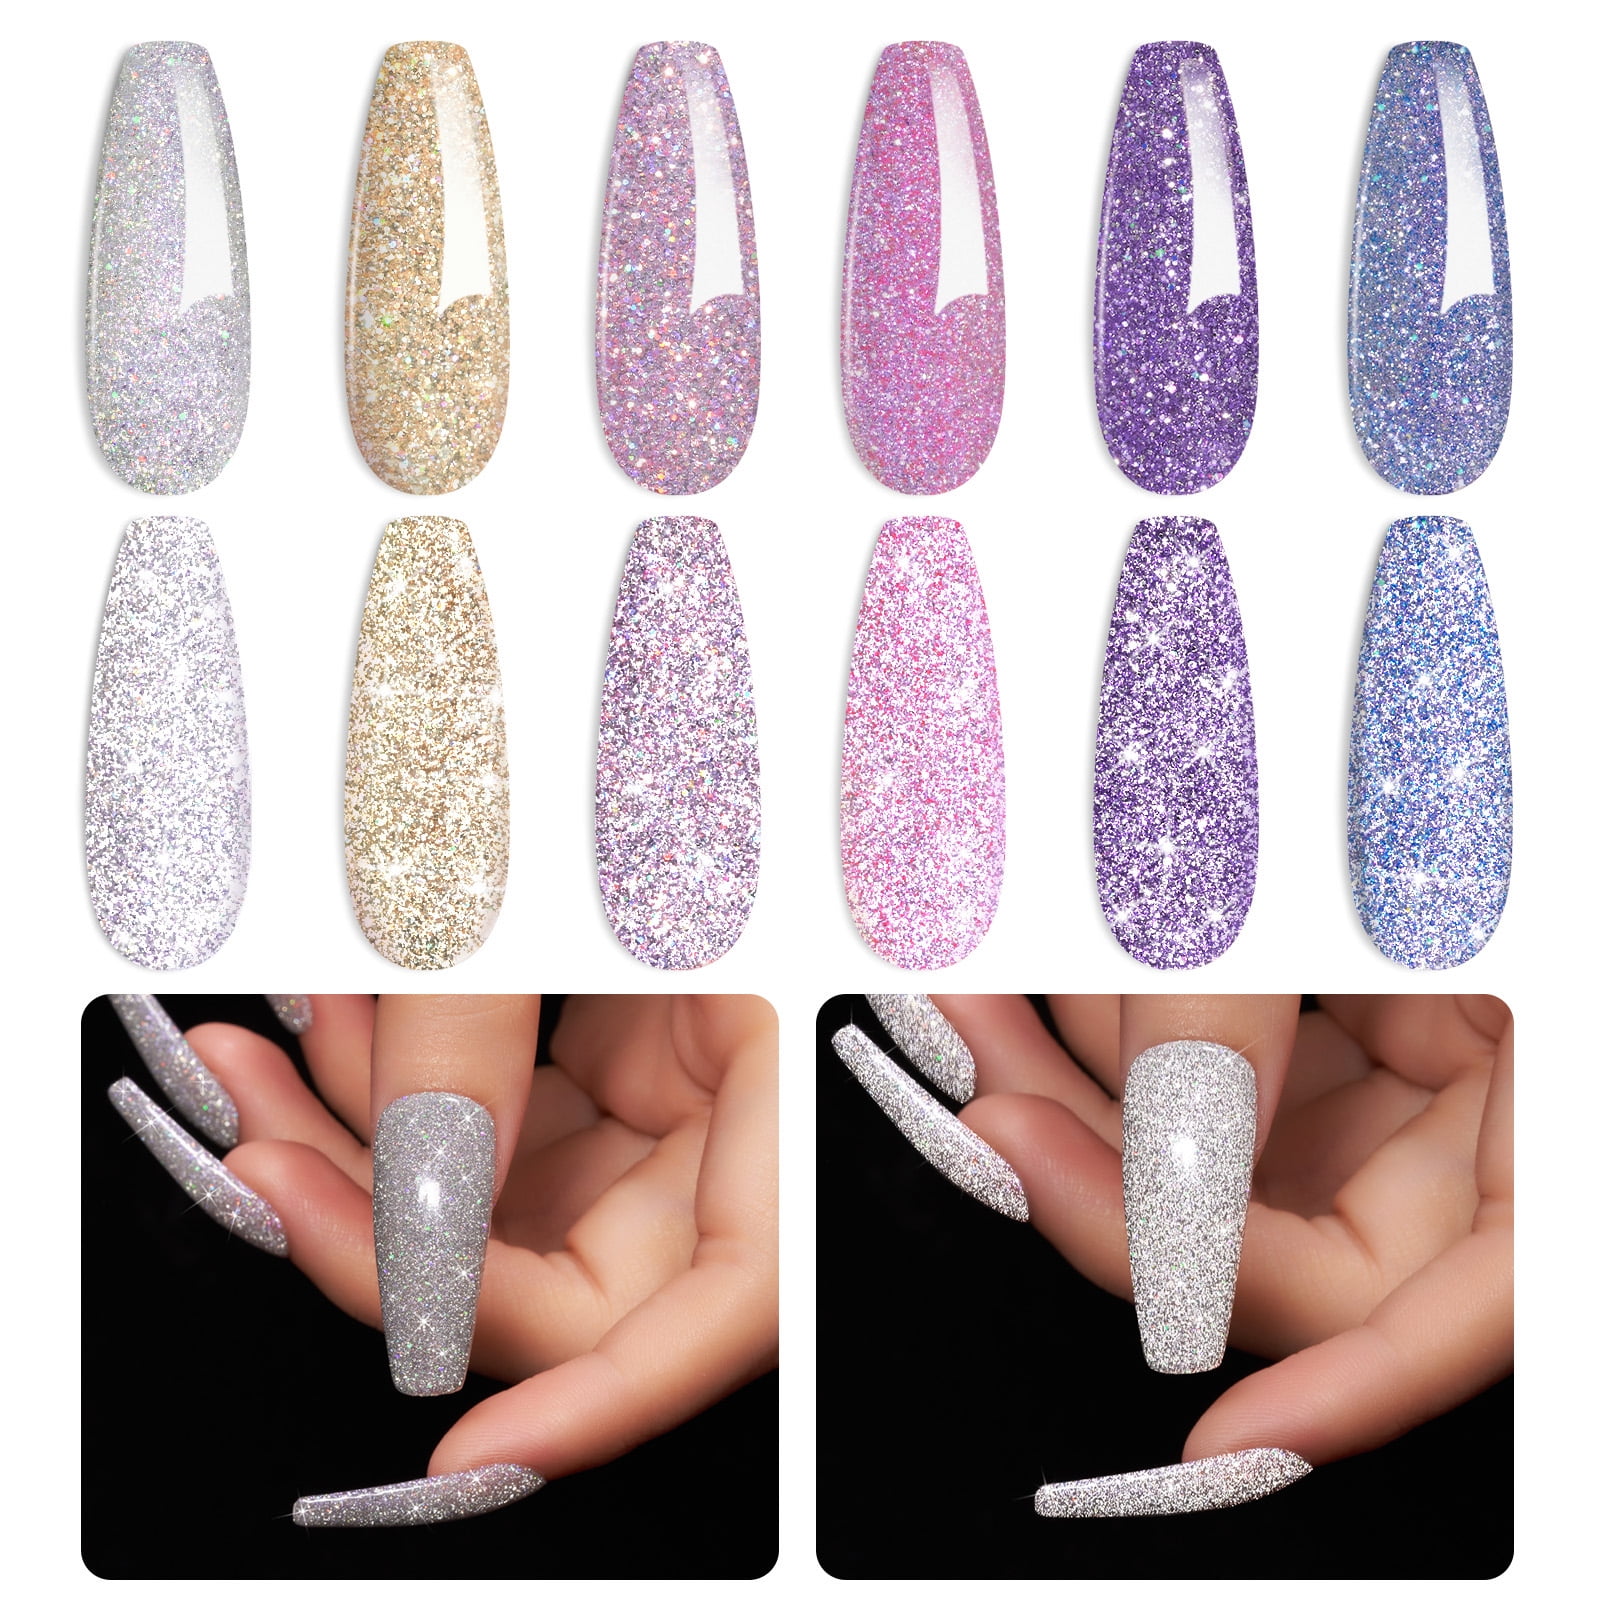 Best White Sparkly Nails for ALL the Wintry Feels! - Ice Cream and Clara